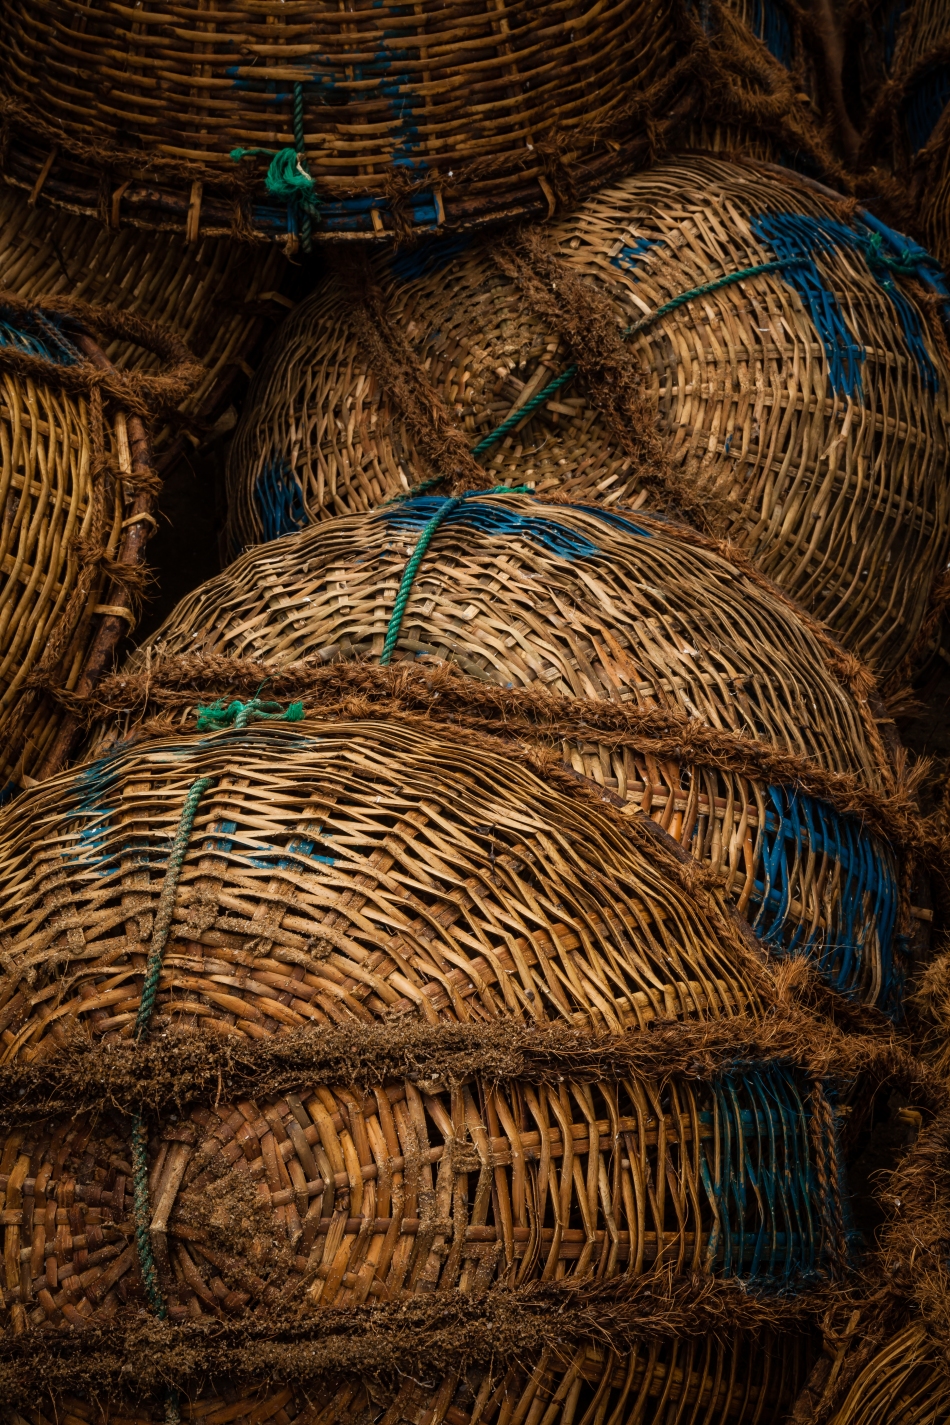 Baskets to collect the sun dried fish with on Negombo beach.